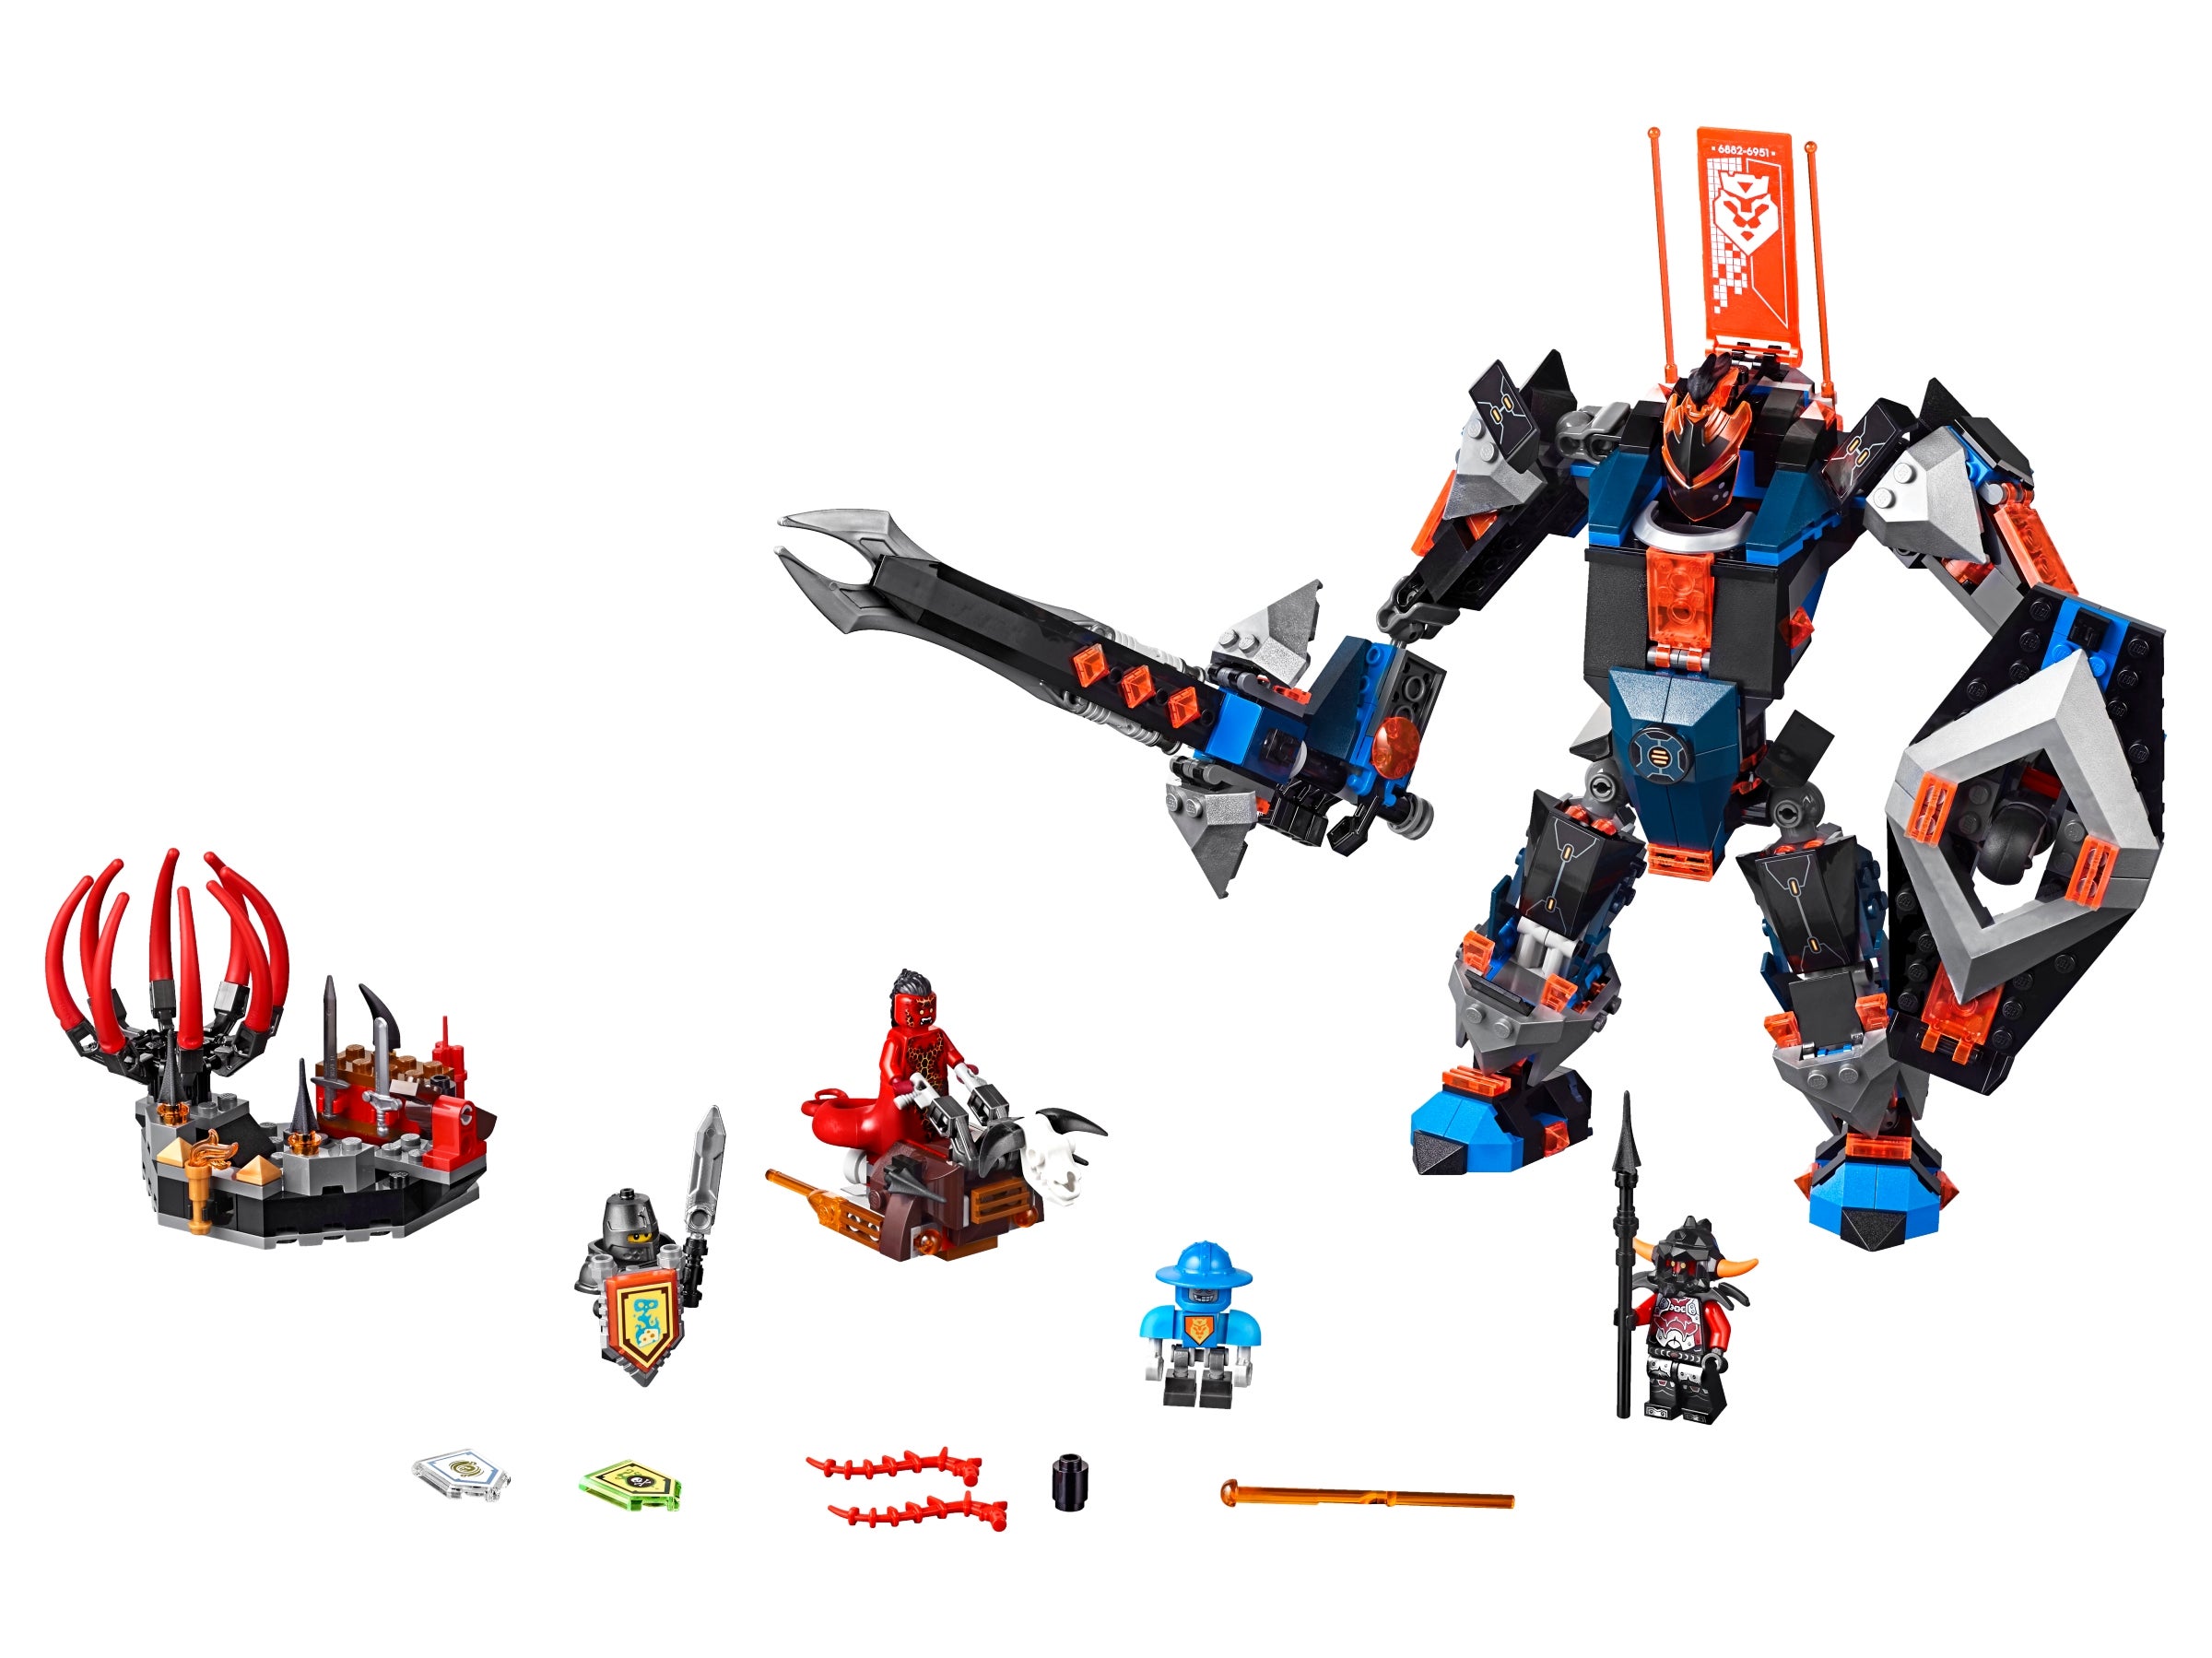 LEGO NEXO KNIGHTS The Black Knight Mech 70326 for sale online